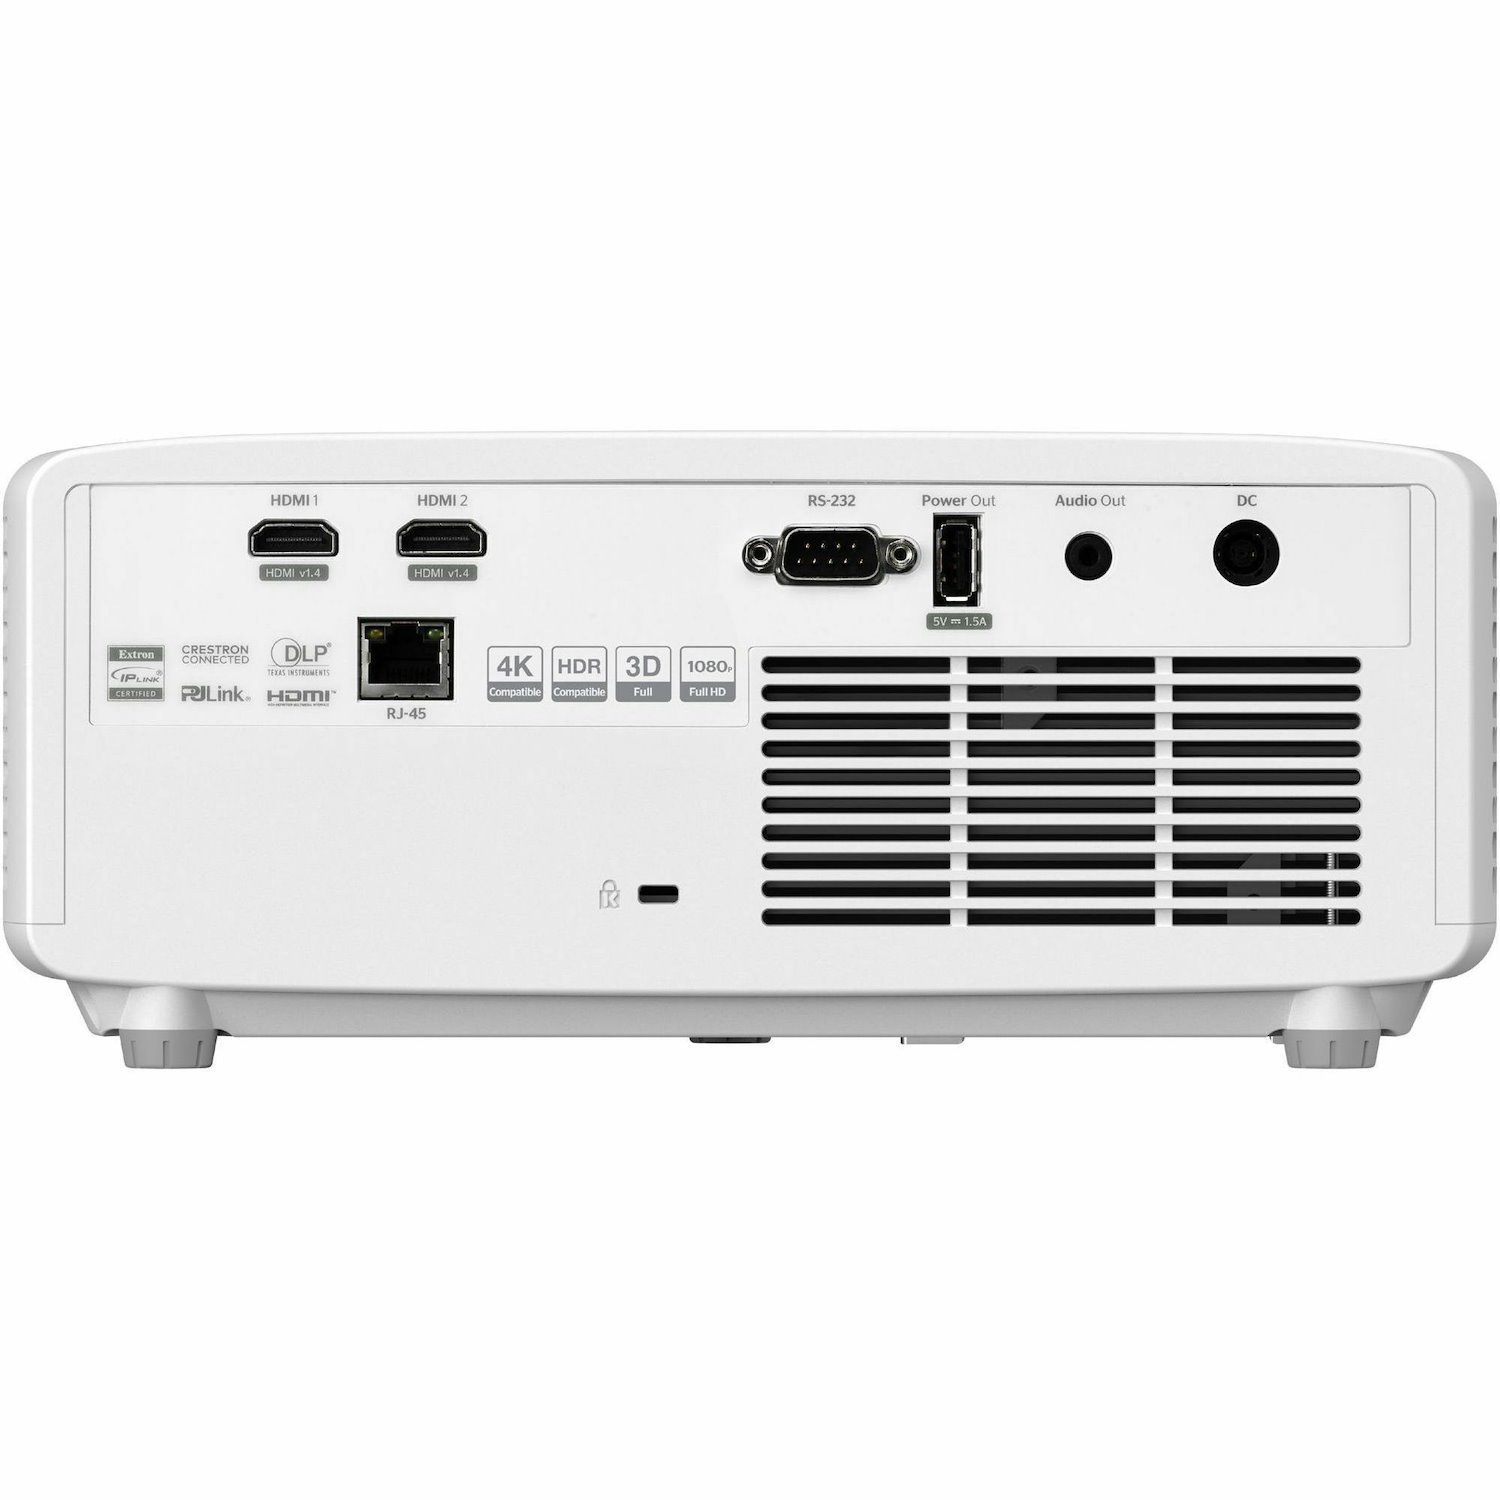 Optoma ZH420 3D DLP Projector - 16:9 - White